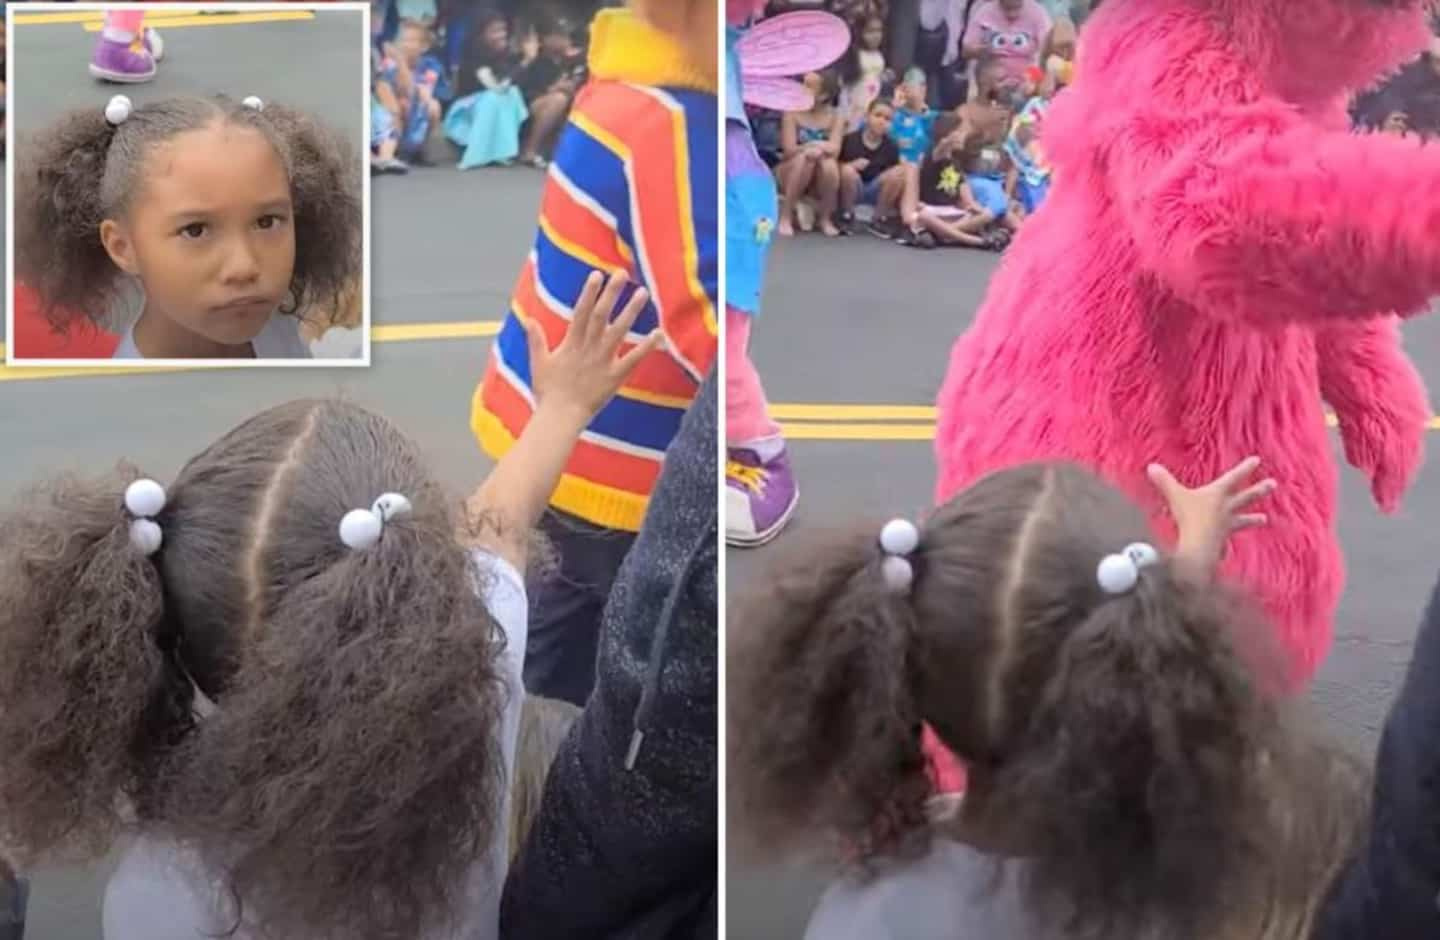 Angry that his daughter is being ignored by mascots, he sues for $25 million